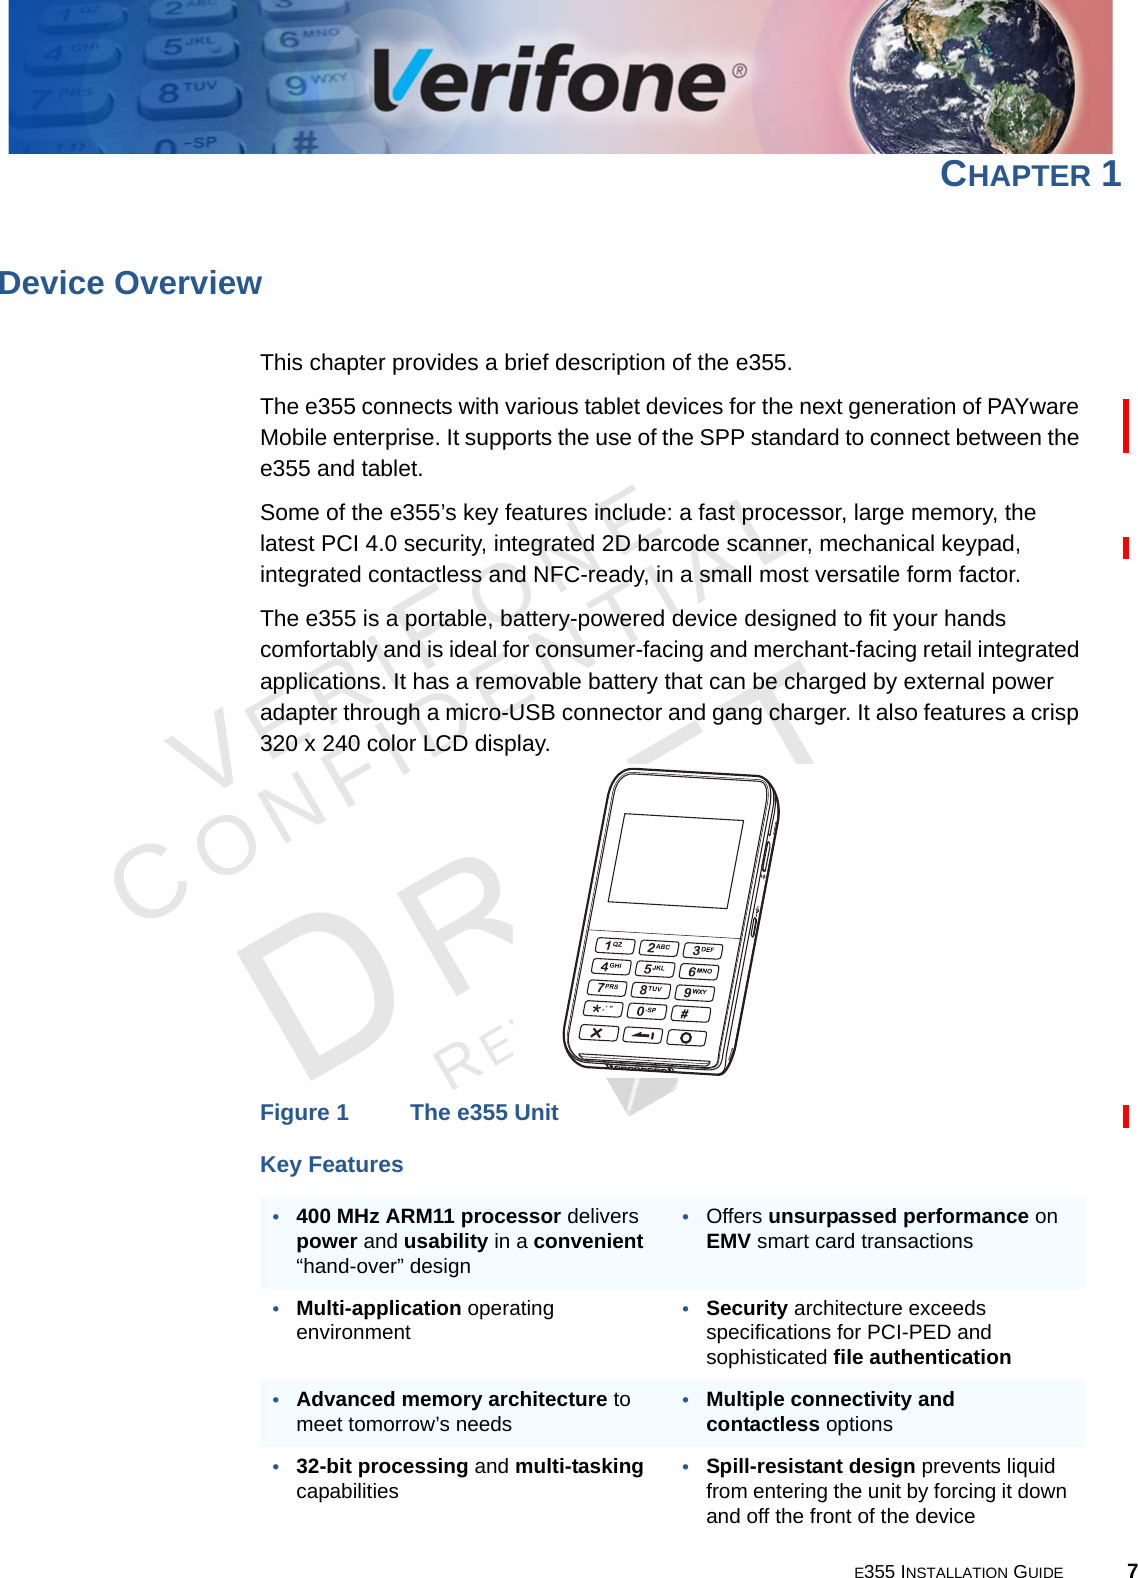 E355 INSTALLATION GUIDE 7VERIFONECONFIDENTIALREVISION A.6 CHAPTER 1Device OverviewThis chapter provides a brief description of the e355.The e355 connects with various tablet devices for the next generation of PAYware Mobile enterprise. It supports the use of the SPP standard to connect between the e355 and tablet.Some of the e355’s key features include: a fast processor, large memory, the latest PCI 4.0 security, integrated 2D barcode scanner, mechanical keypad, integrated contactless and NFC-ready, in a small most versatile form factor.The e355 is a portable, battery-powered device designed to fit your hands comfortably and is ideal for consumer-facing and merchant-facing retail integrated applications. It has a removable battery that can be charged by external power adapter through a micro-USB connector and gang charger. It also features a crisp 320 x 240 color LCD display.Figure 1 The e355 UnitKey Features•400 MHz ARM11 processor delivers power and usability in a convenient “hand-over” design•Offers unsurpassed performance on EMV smart card transactions•Multi-application operating environment•Security architecture exceeds specifications for PCI-PED and sophisticated file authentication•Advanced memory architecture to meet tomorrow’s needs•Multiple connectivity and contactless options•32-bit processing and multi-tasking capabilities•Spill-resistant design prevents liquid from entering the unit by forcing it down and off the front of the device